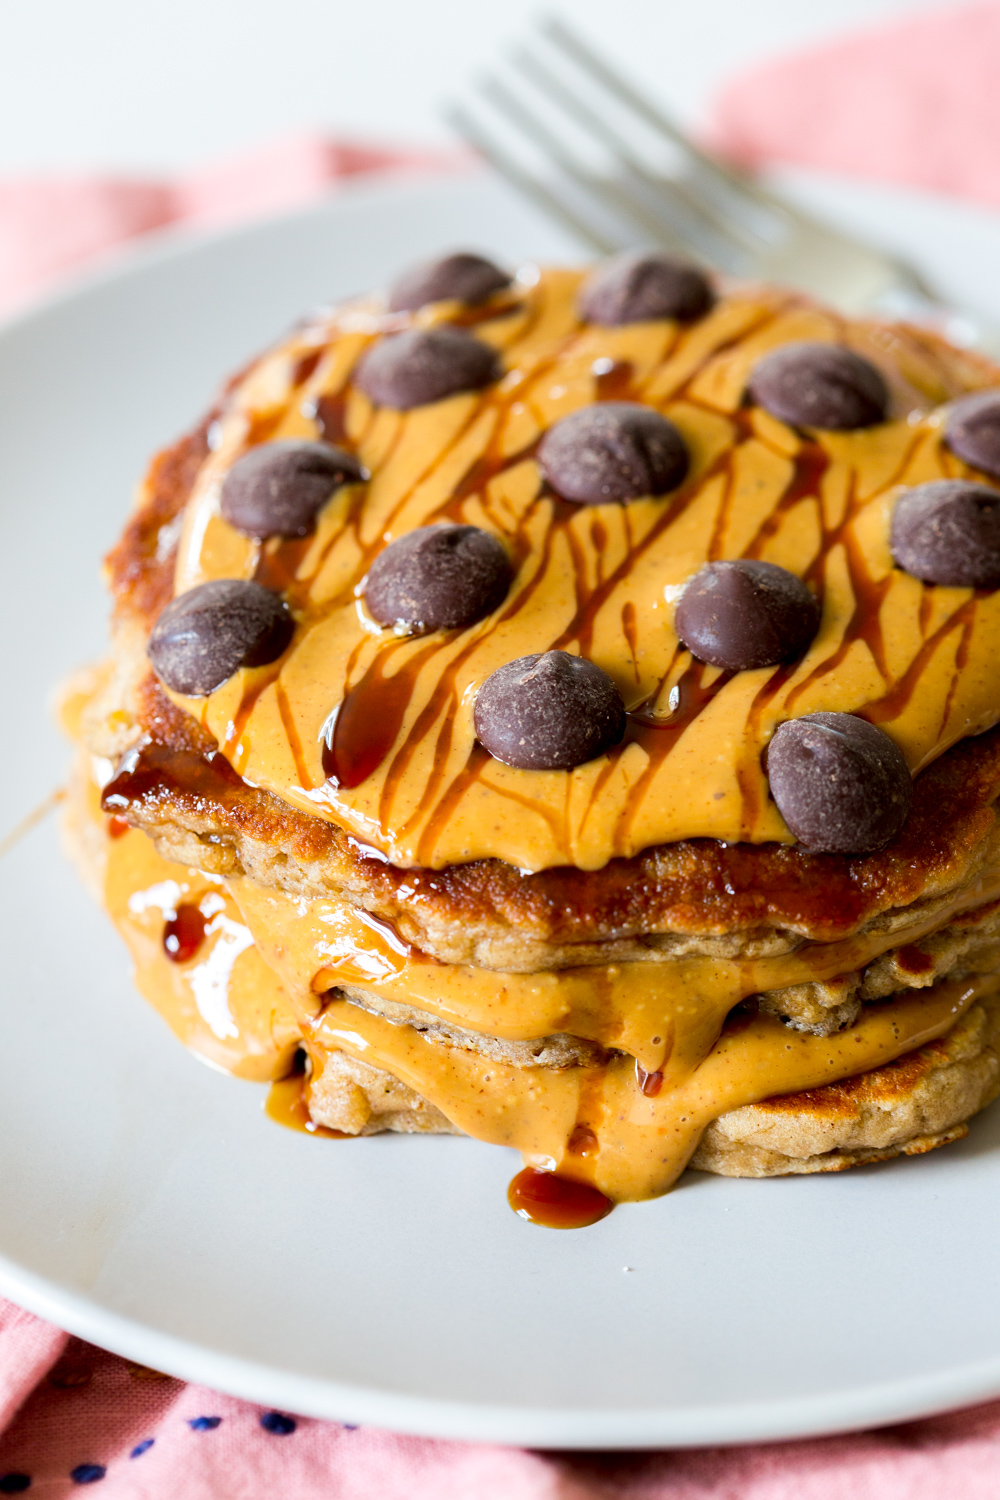 Gluten Free Almond Flour Banana Pancakes with almond butter, Just Date Syrup and dark chocolate chips